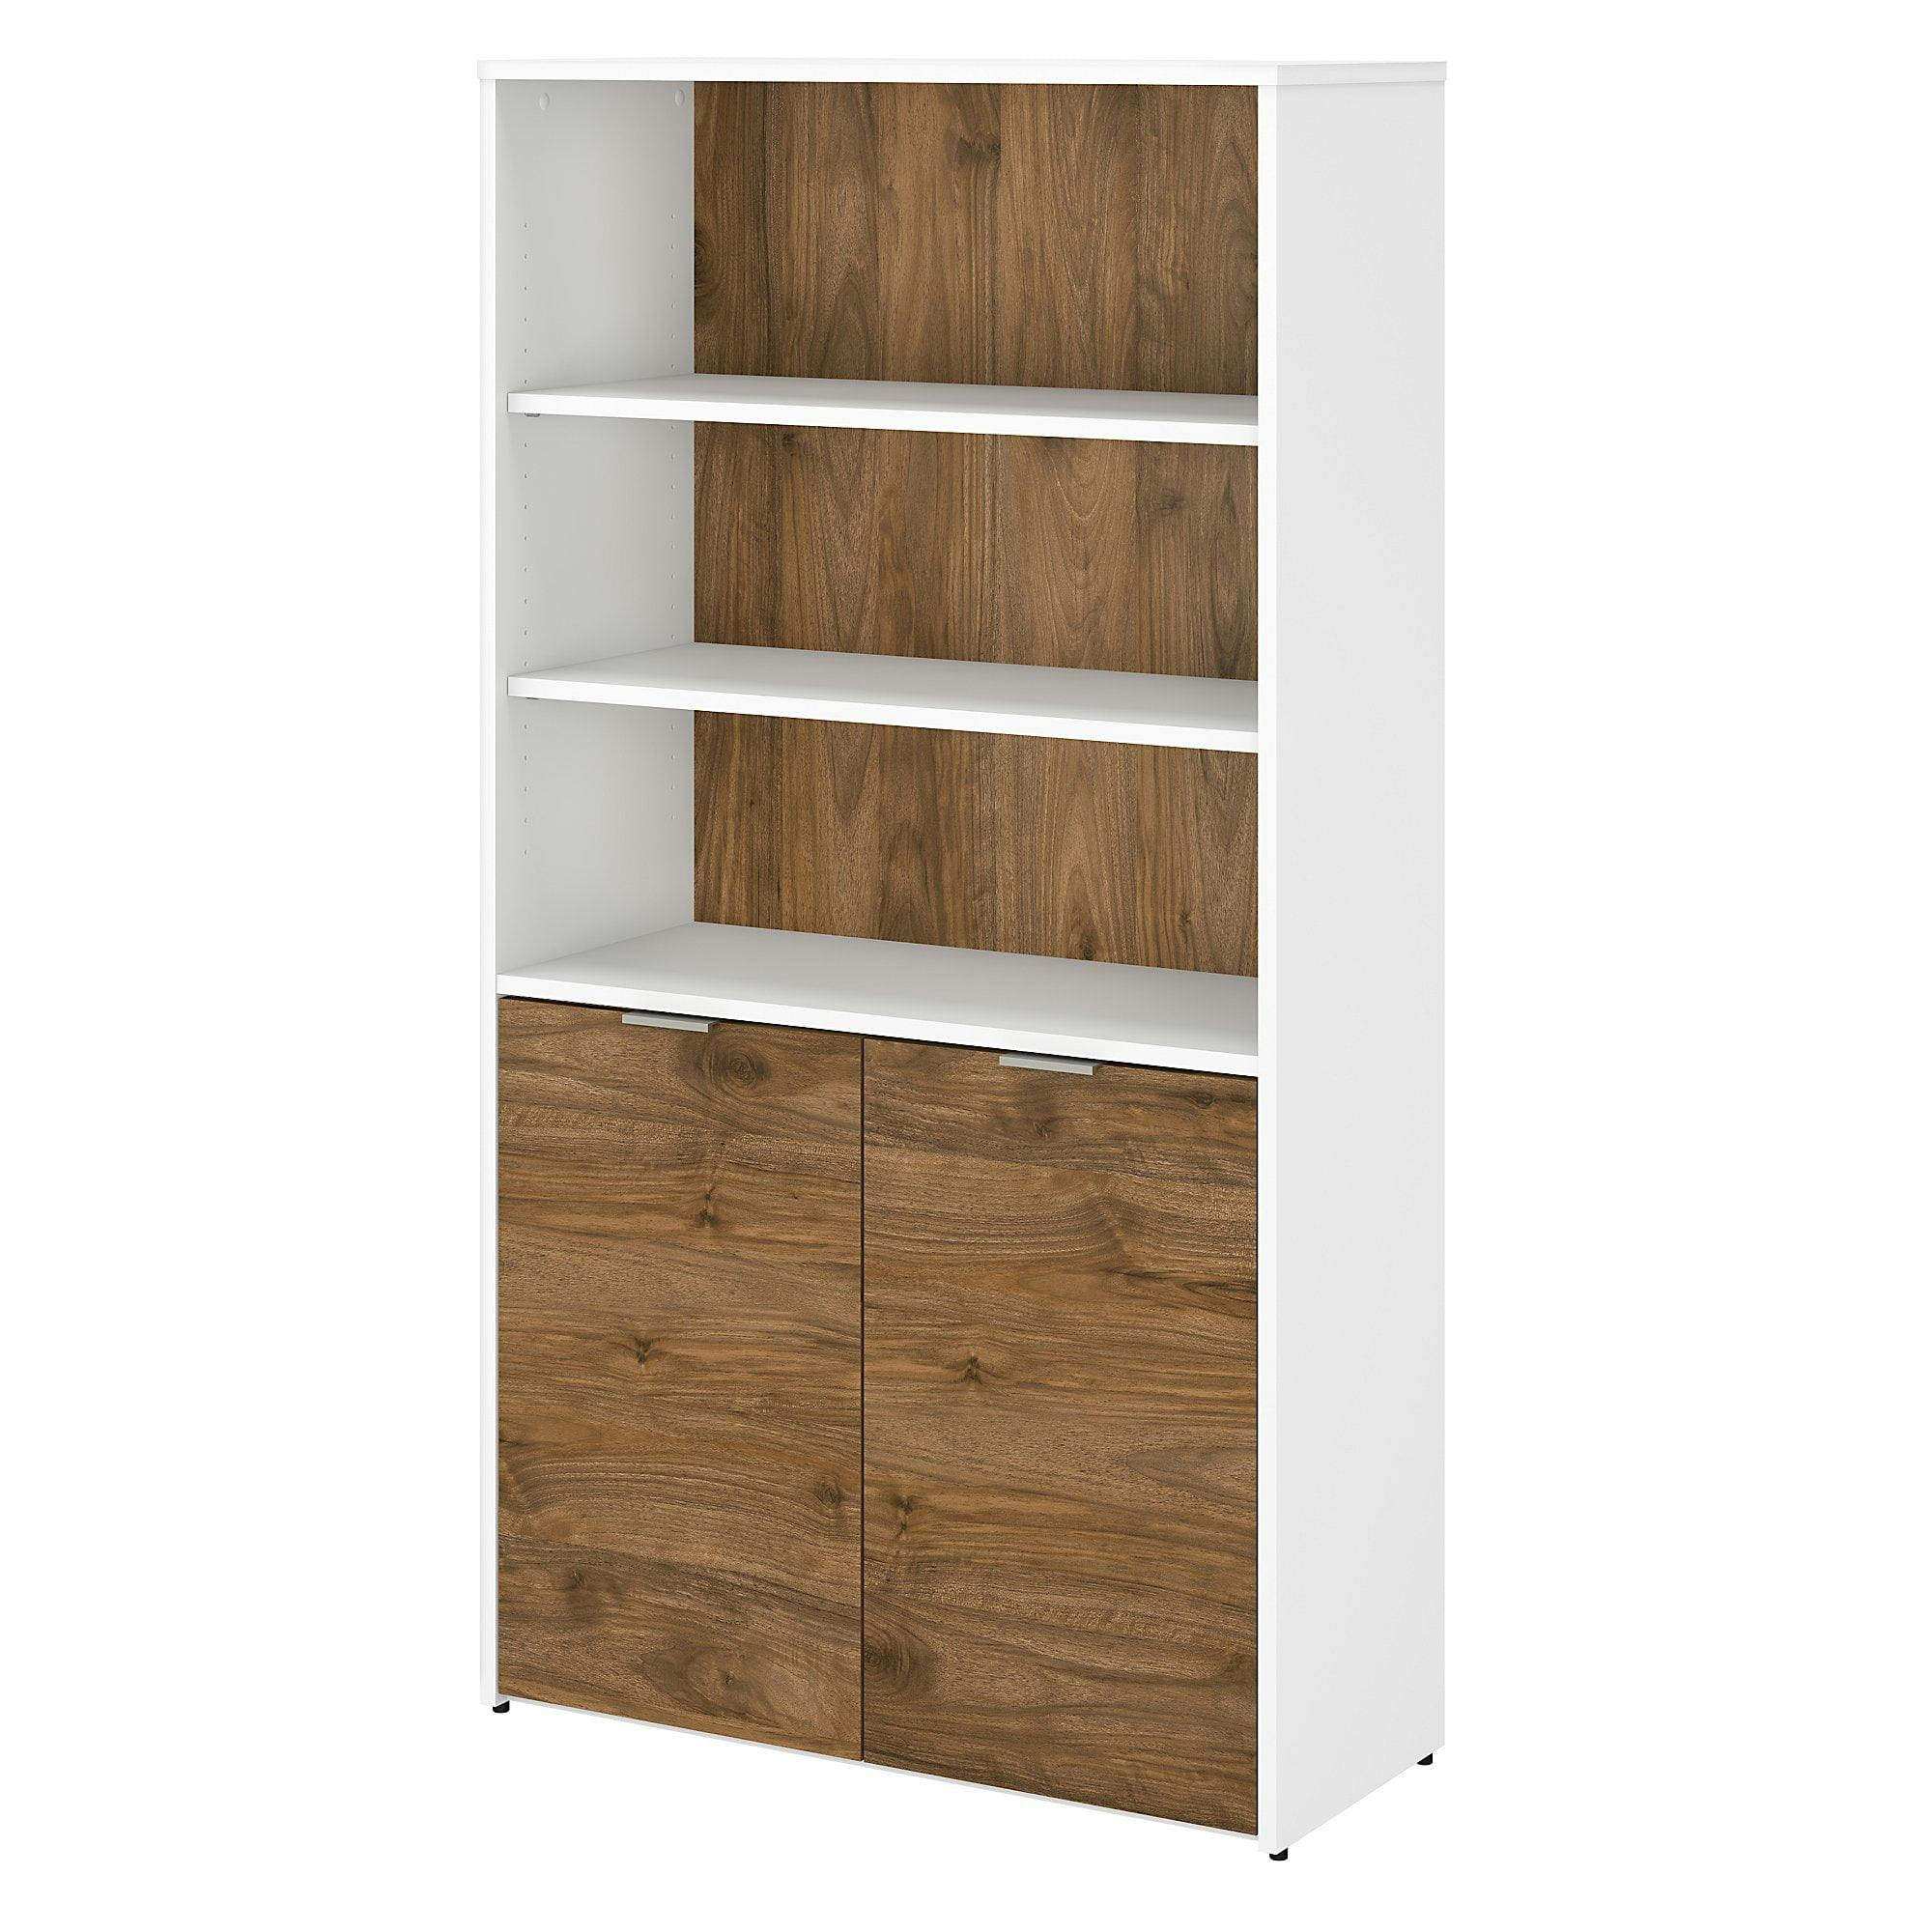 Adjustable Fresh Walnut & White Wood Composite Bookcase with Doors